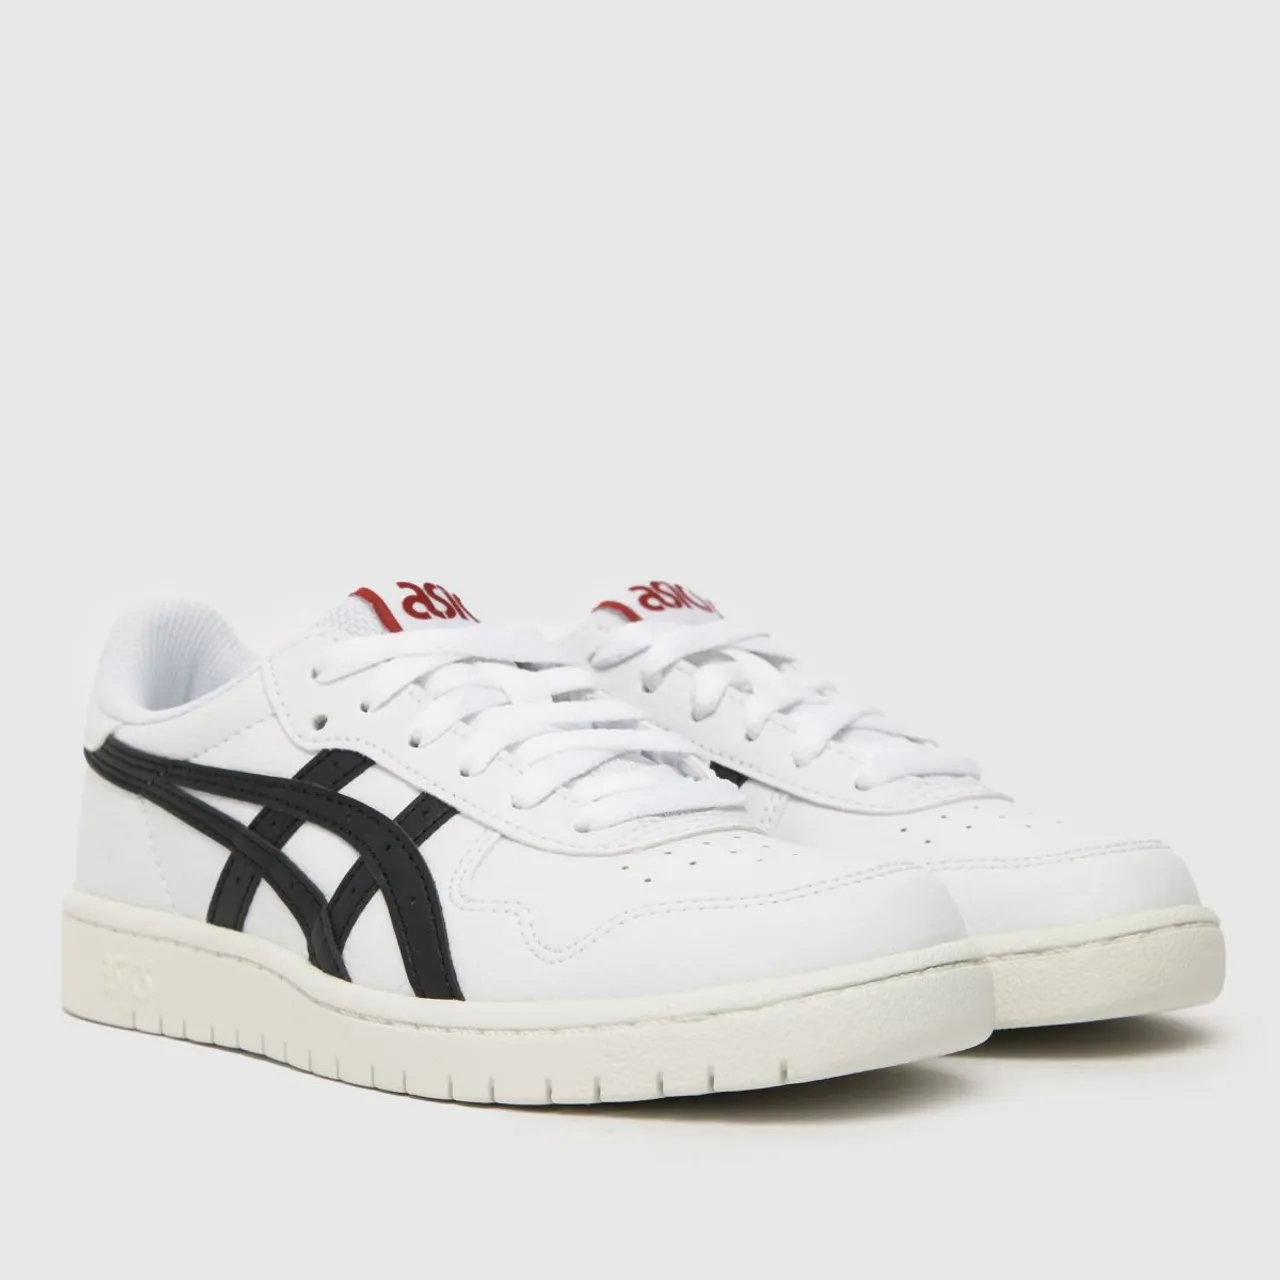 Asics White & Black Japan S Youth Trainers